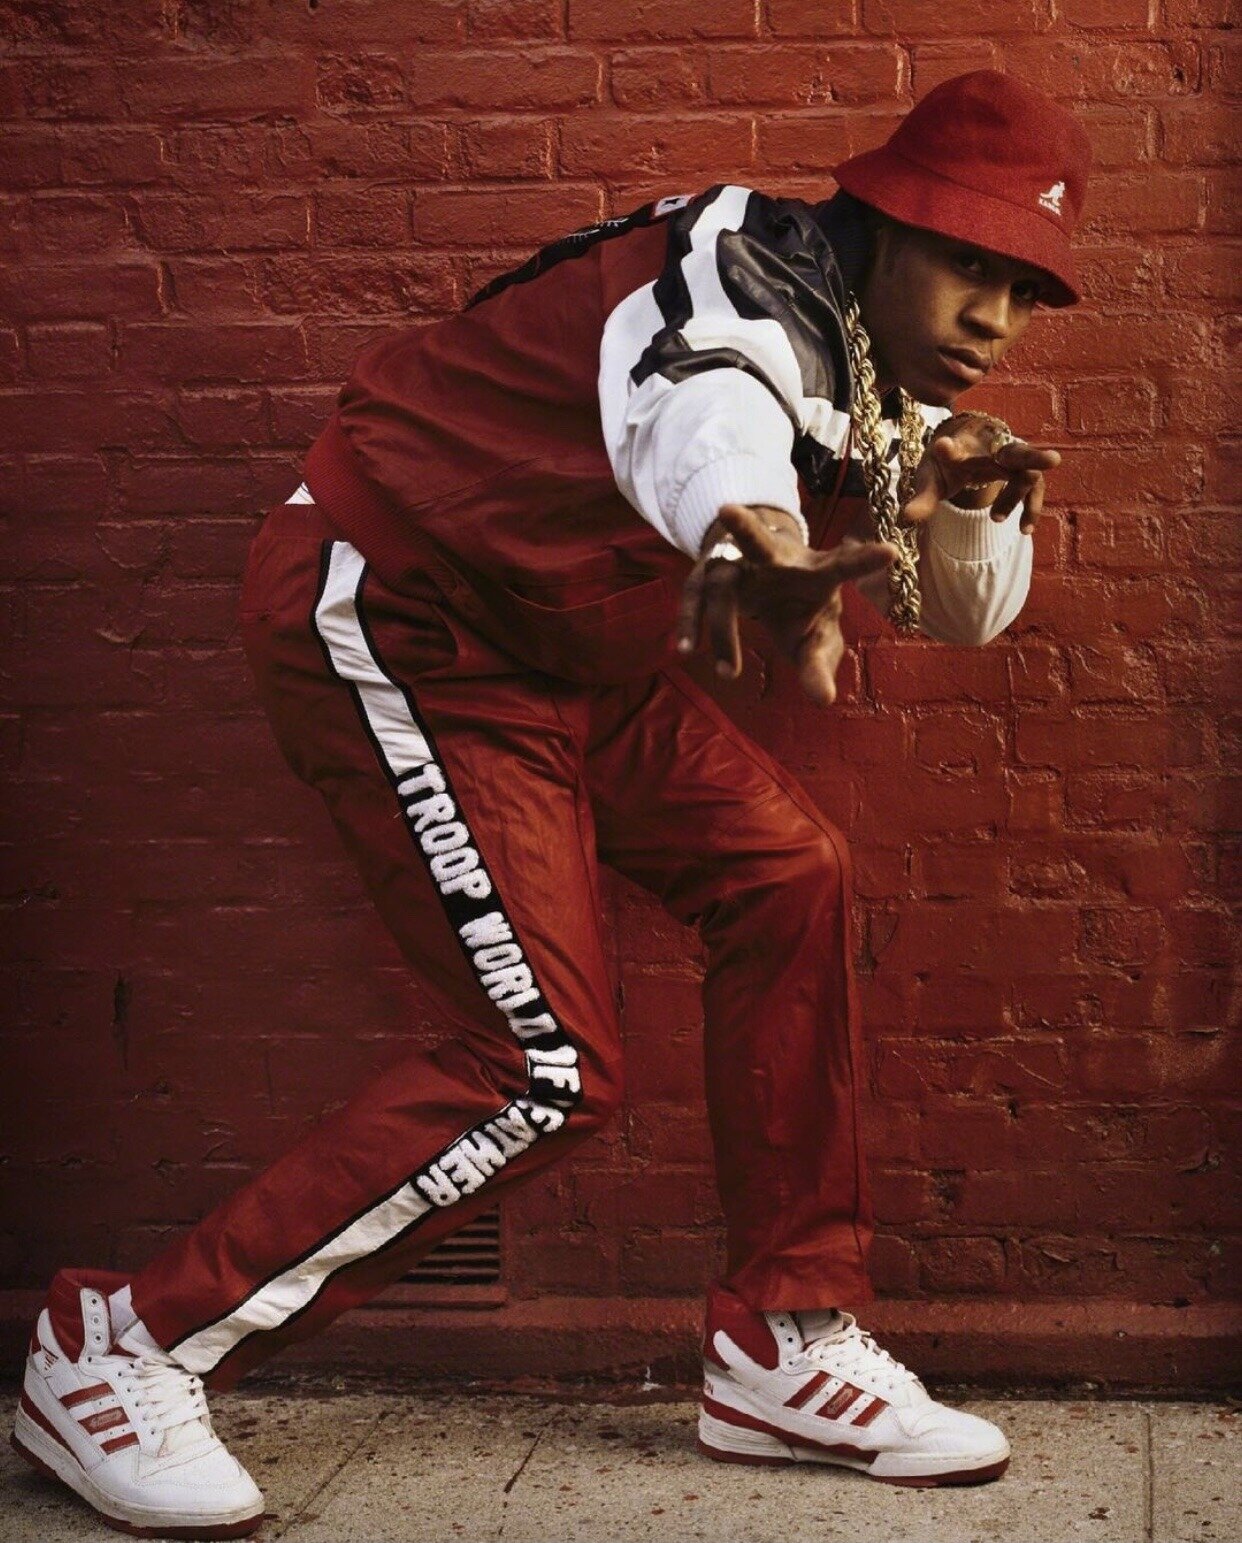 LL Cool J photographed by Mark Seliger in 1987